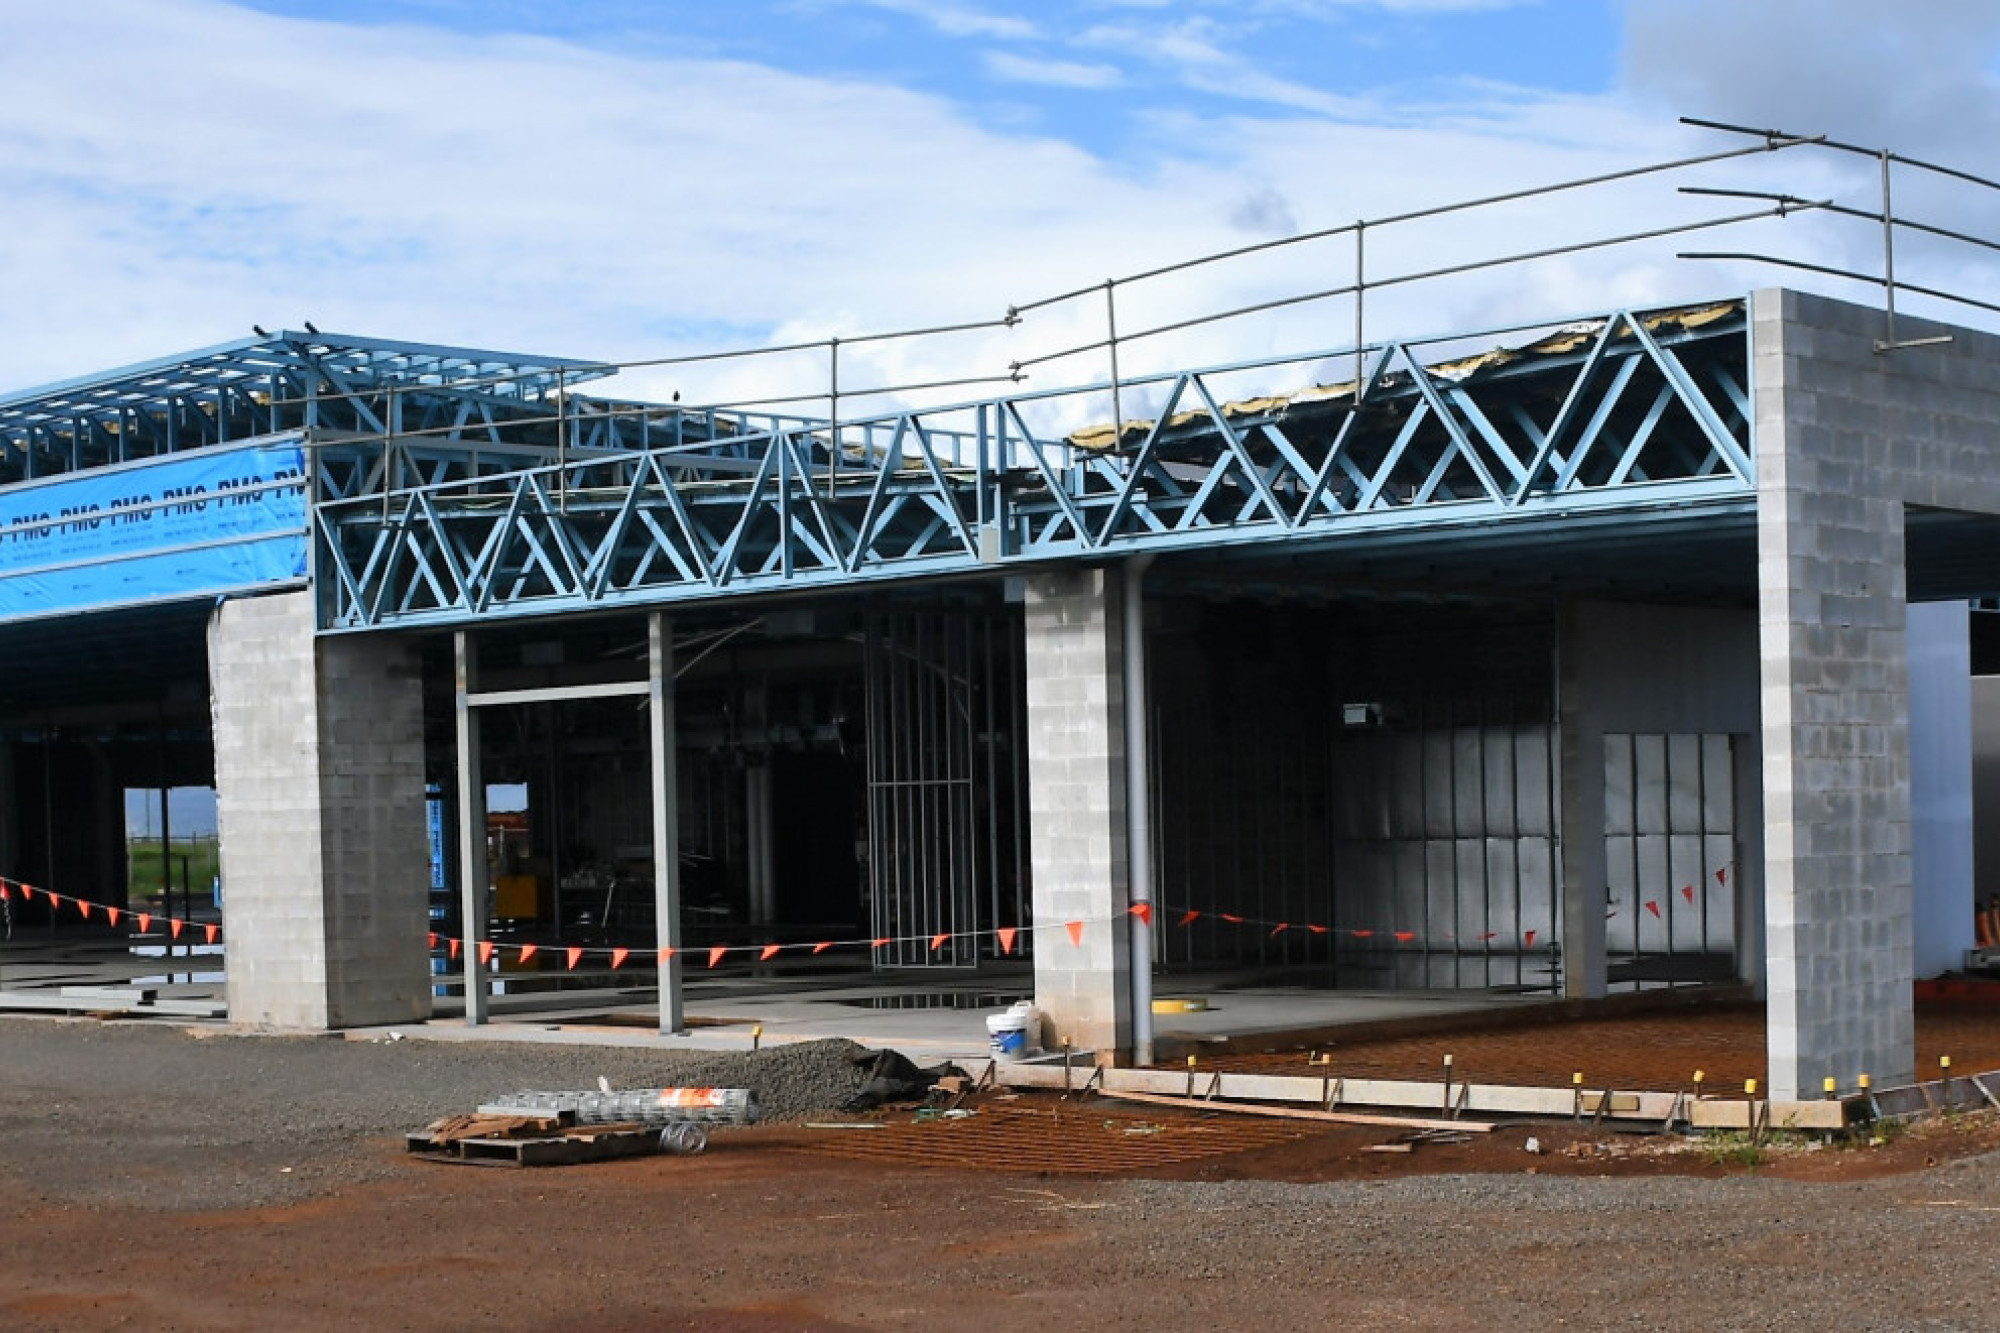 Workers on site of the new John Cole Toyota building on the Kennedy Highway in Atherton. Photo Credit - Keir Qld.